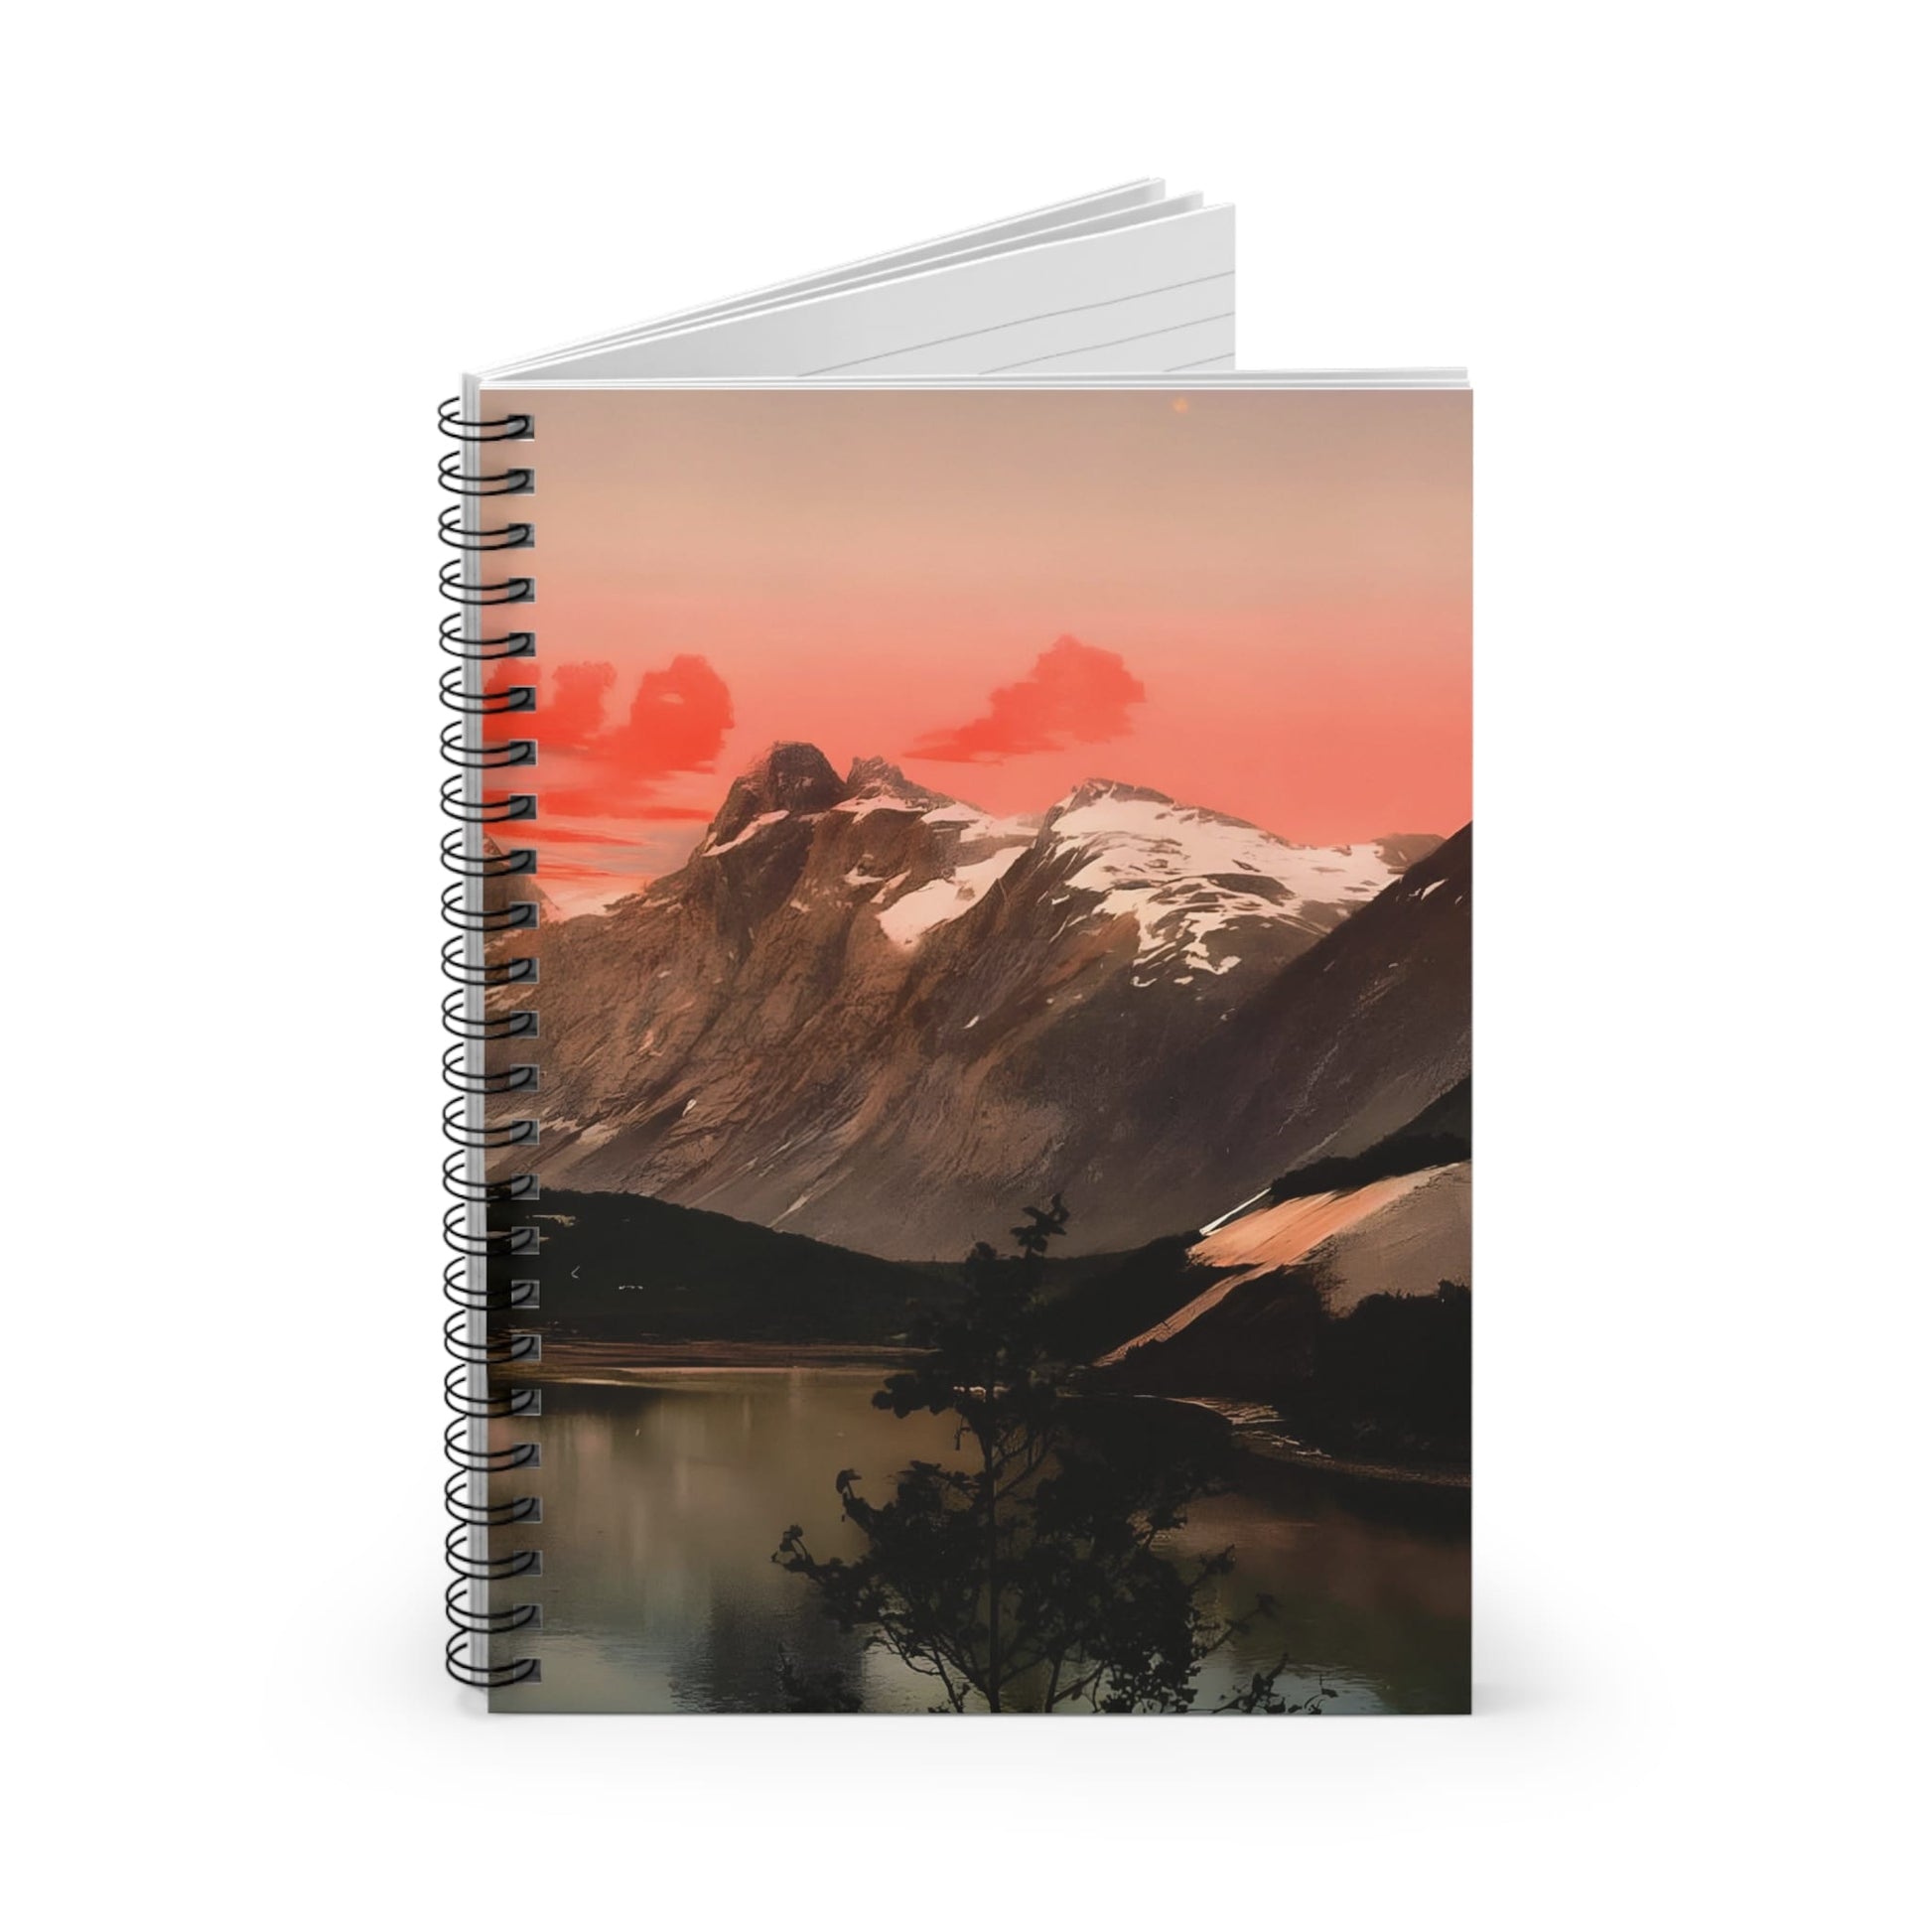 Red Mountain Sunset Spiral Notebook Standing up on White Desk